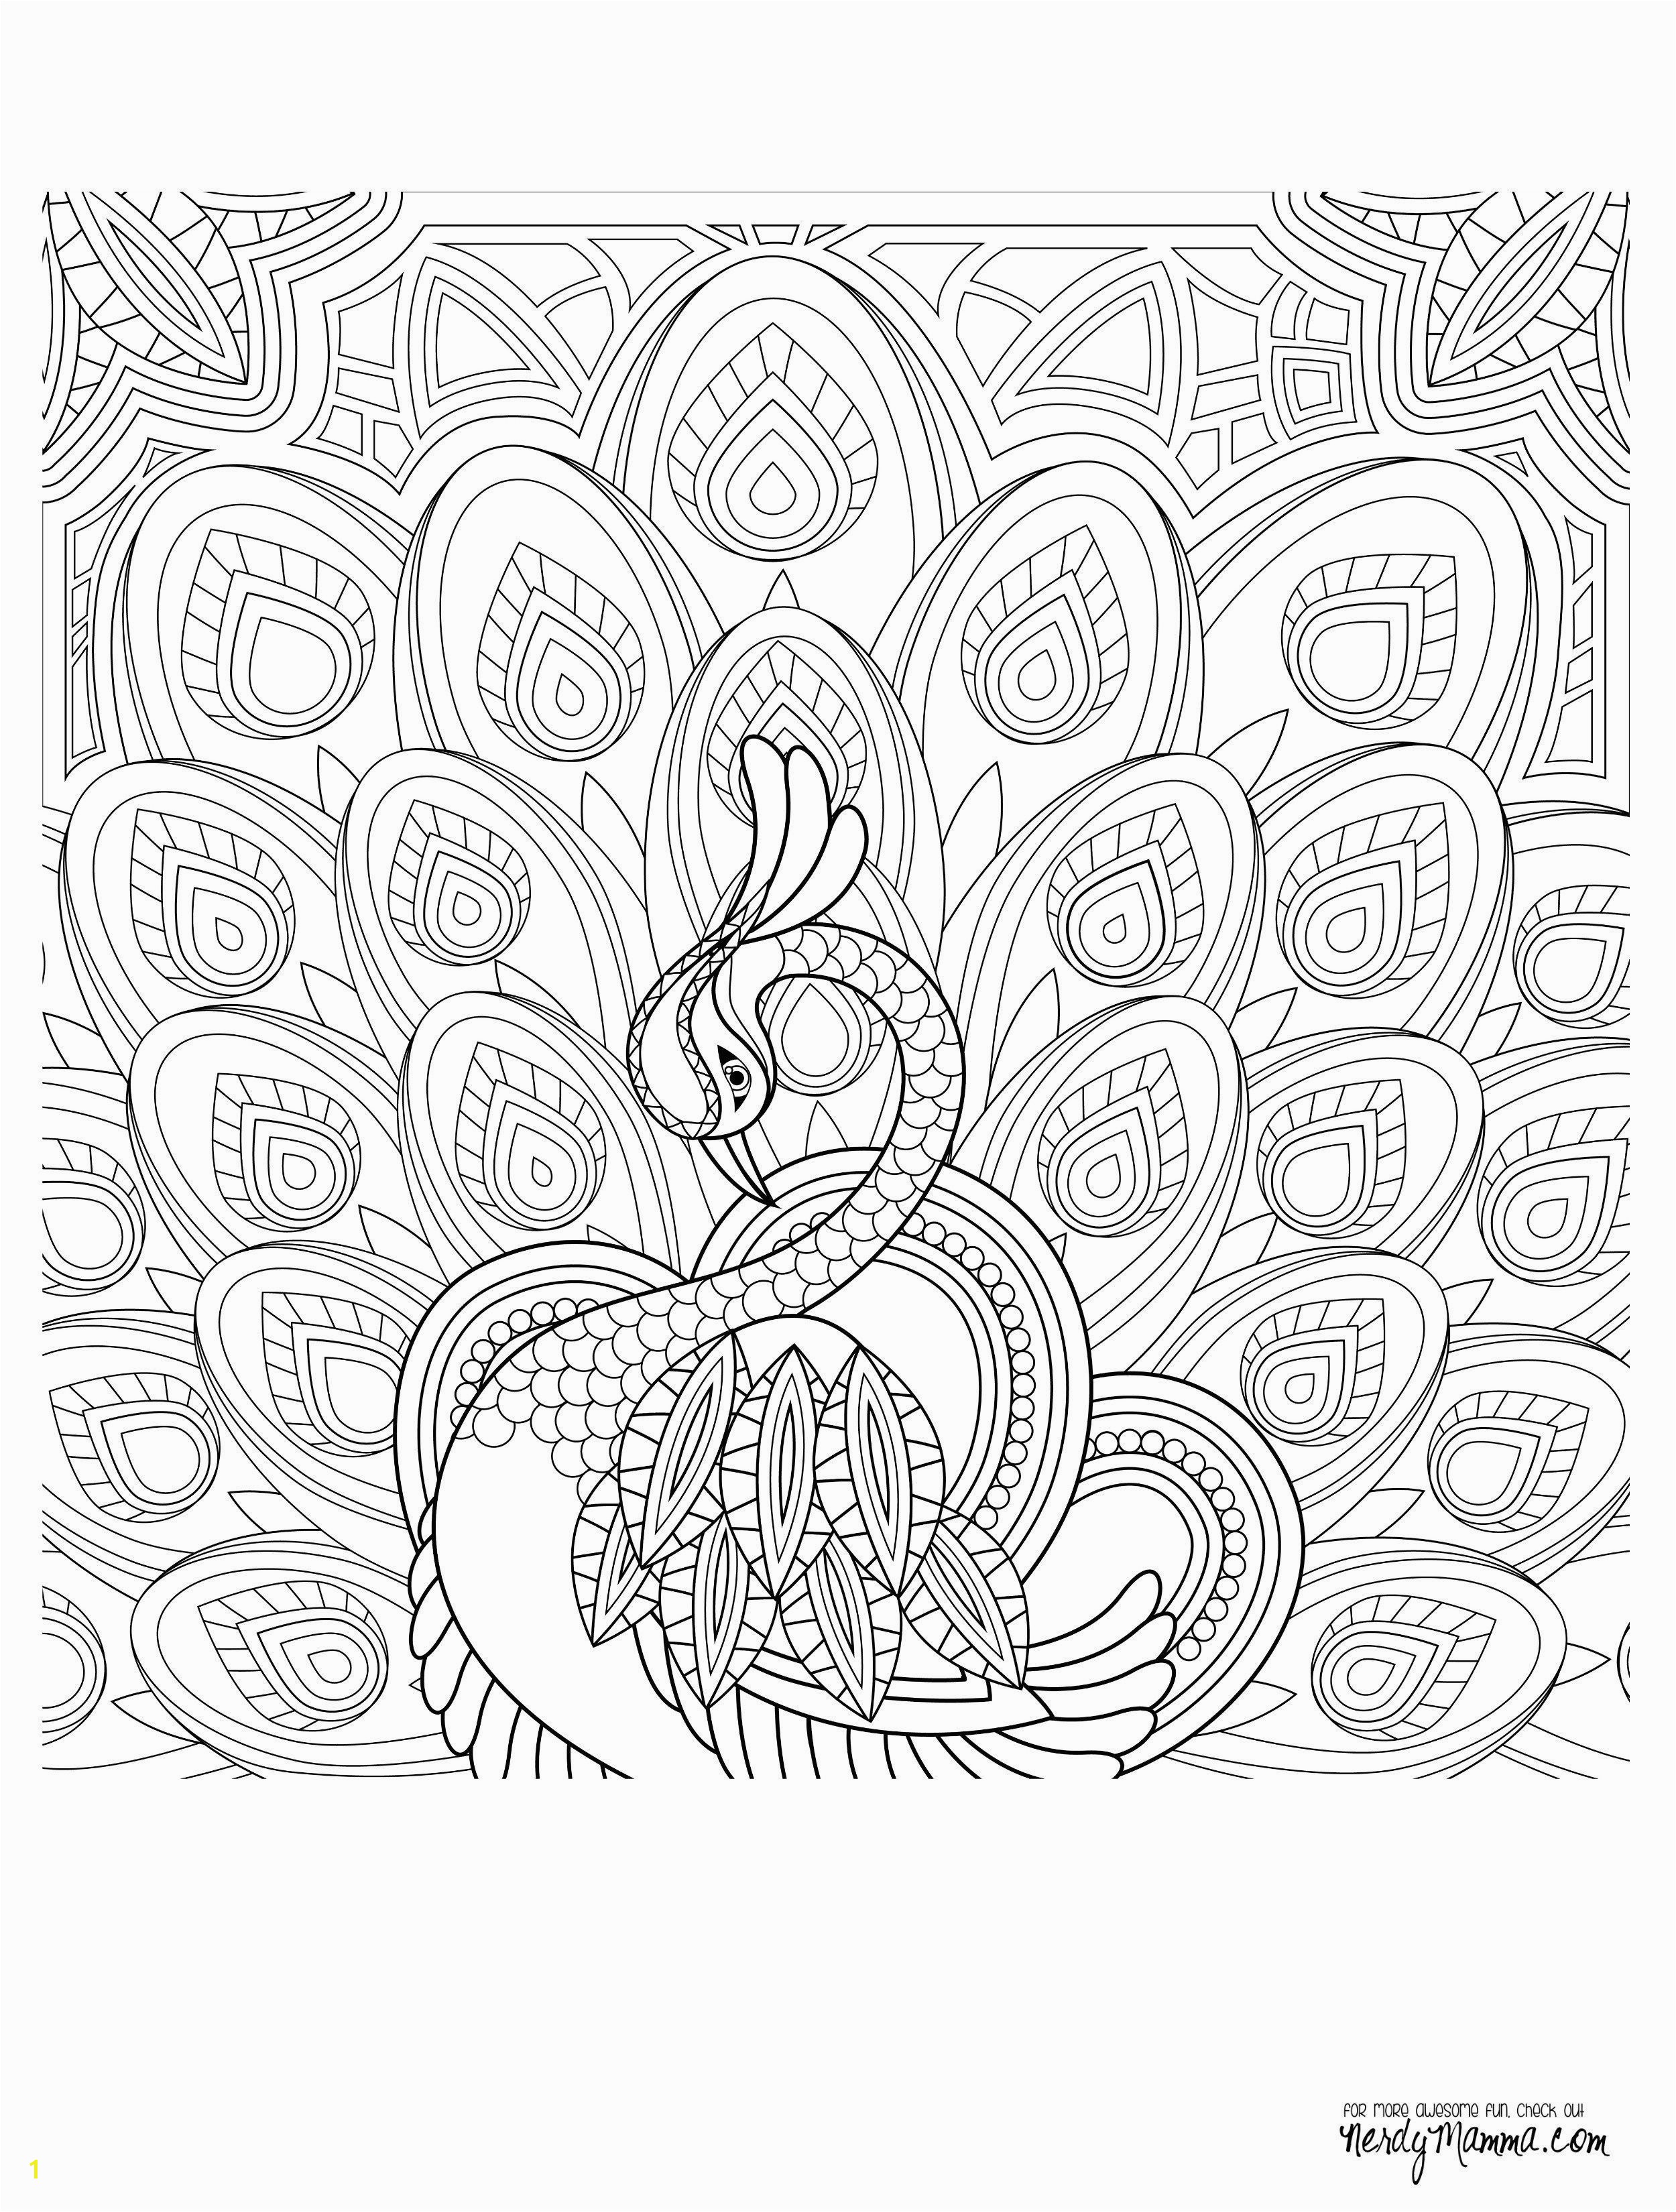 Tweety Bird Halloween Coloring Pages Elegant Vampire Coloring Pages Adults Katesgrove